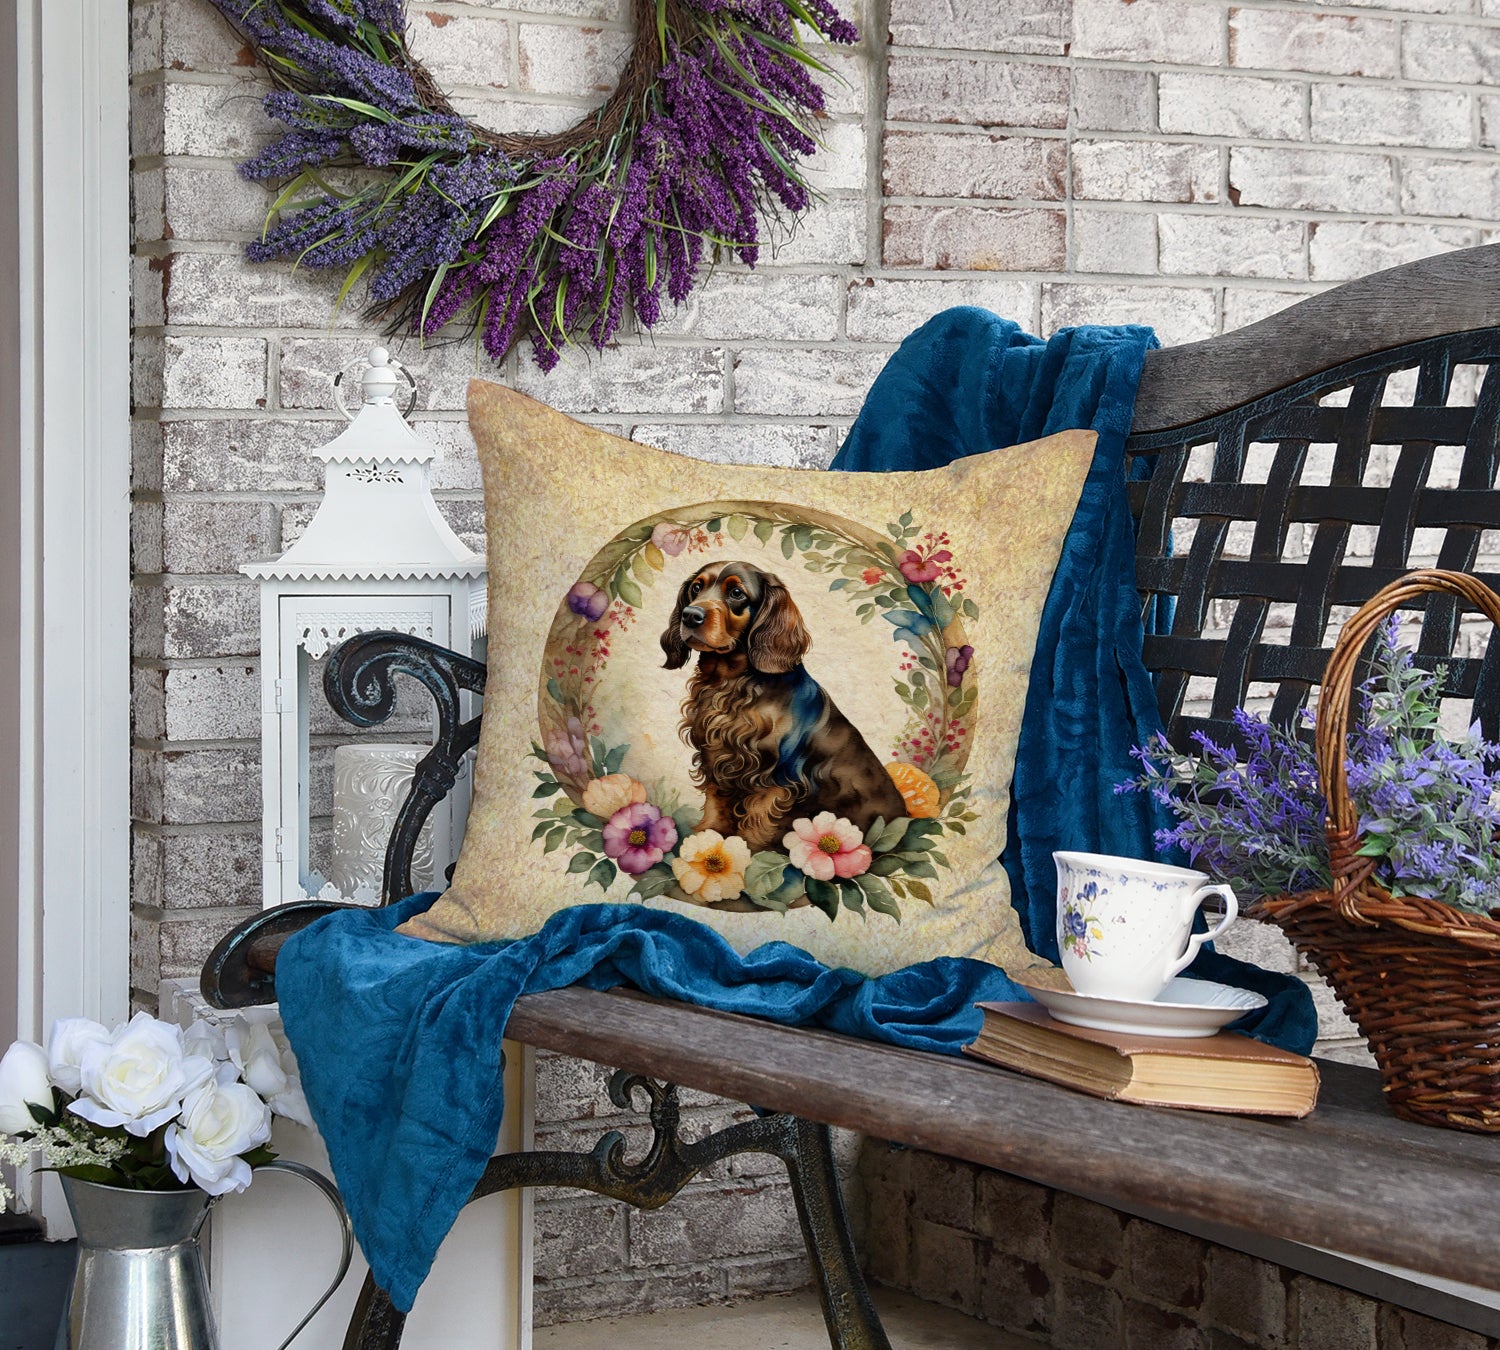 Field Spaniel and Flowers Fabric Decorative Pillow